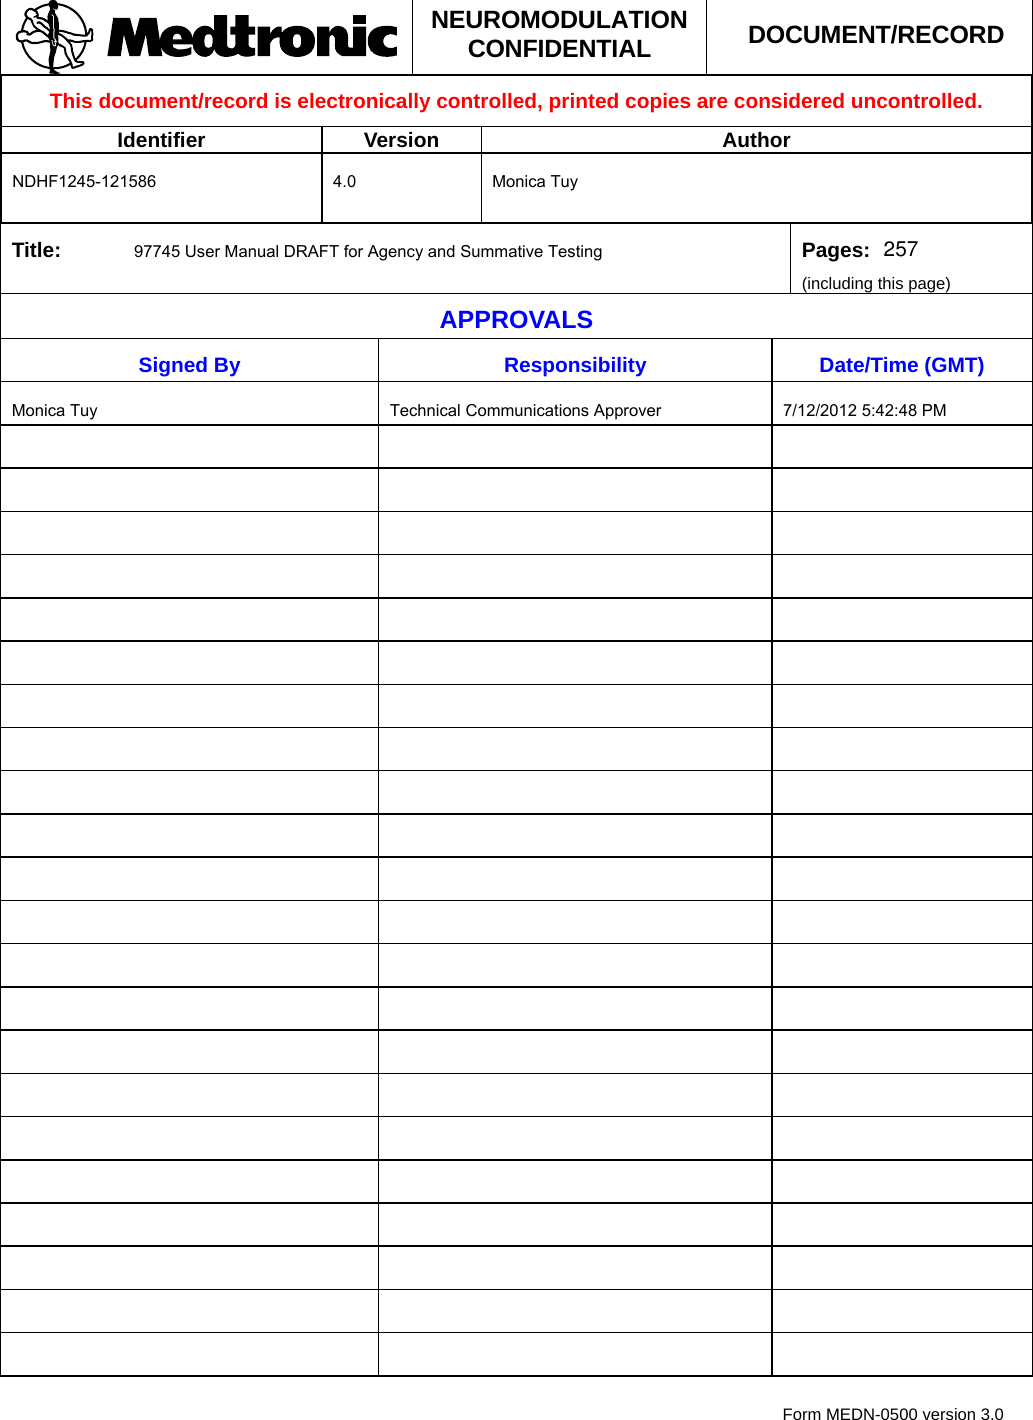  Form MEDN-0500 version 3.0  NEUROMODULATION CONFIDENTIAL  DOCUMENT/RECORD This document/record is electronically controlled, printed copies are considered uncontrolled. Identifier Version  Author           Title:                                 Pages: (including this page)  APPROVALS Signed By Responsibility Date/Time (GMT)                                                                                                                                 NDHF1245-121586 4.0 Monica Tuy97745 User Manual DRAFT for Agency and Summative TestingMonica Tuy Technical Communications Approver 7/12/2012 5:42:48 PM257